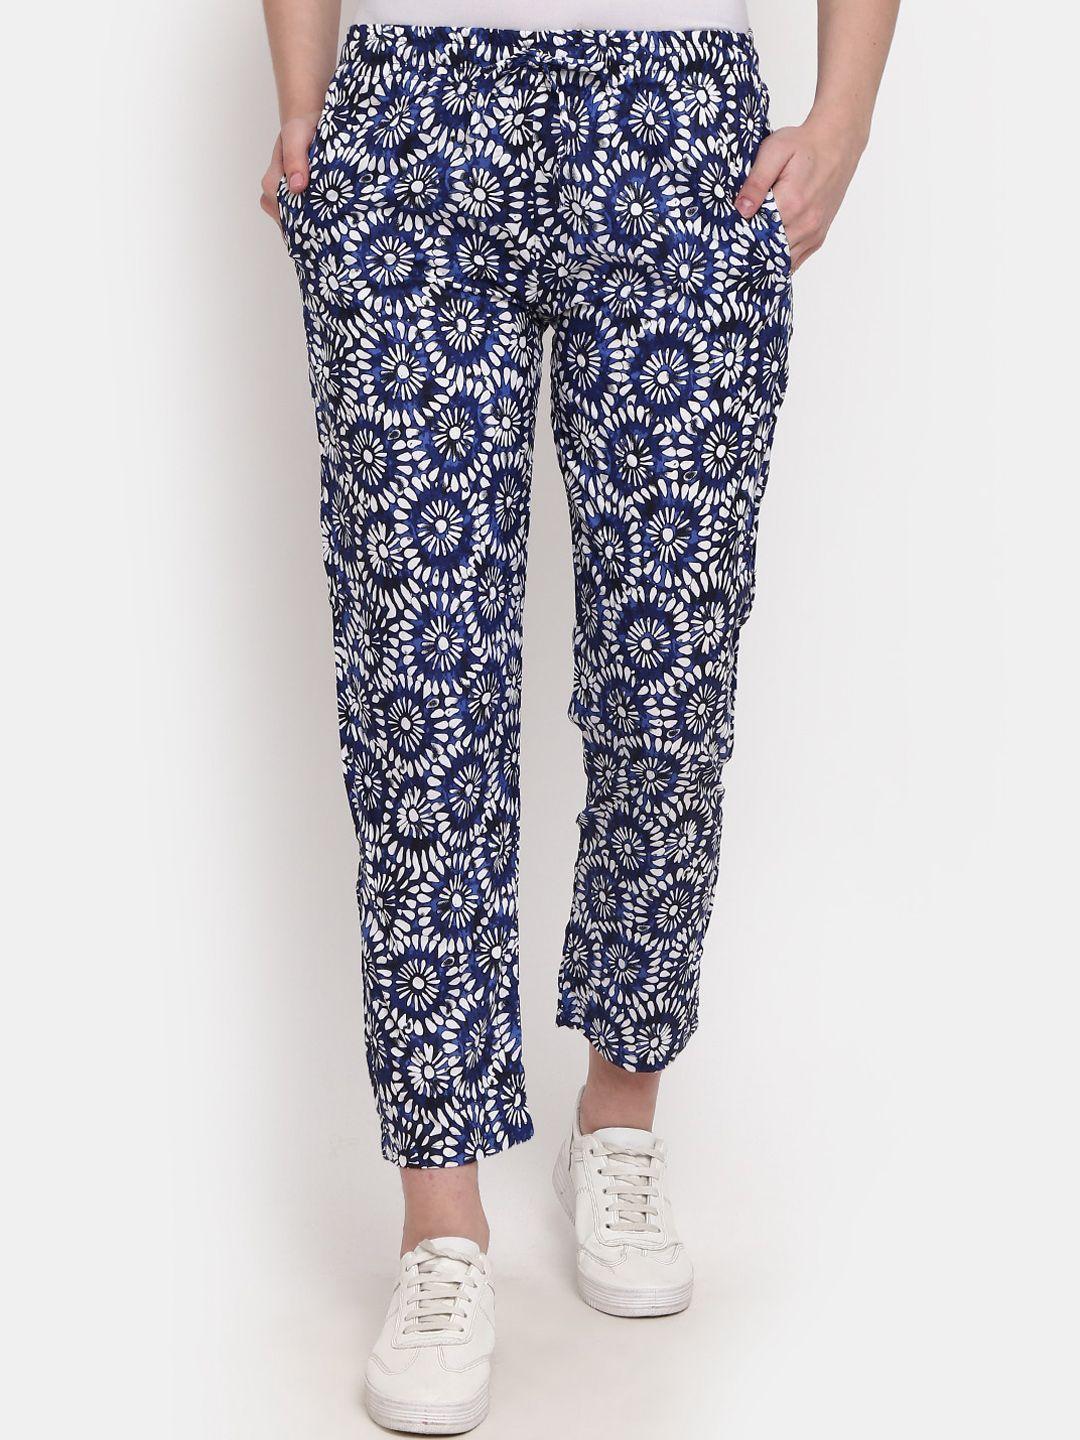 v-mart floral printed mid rise trousers